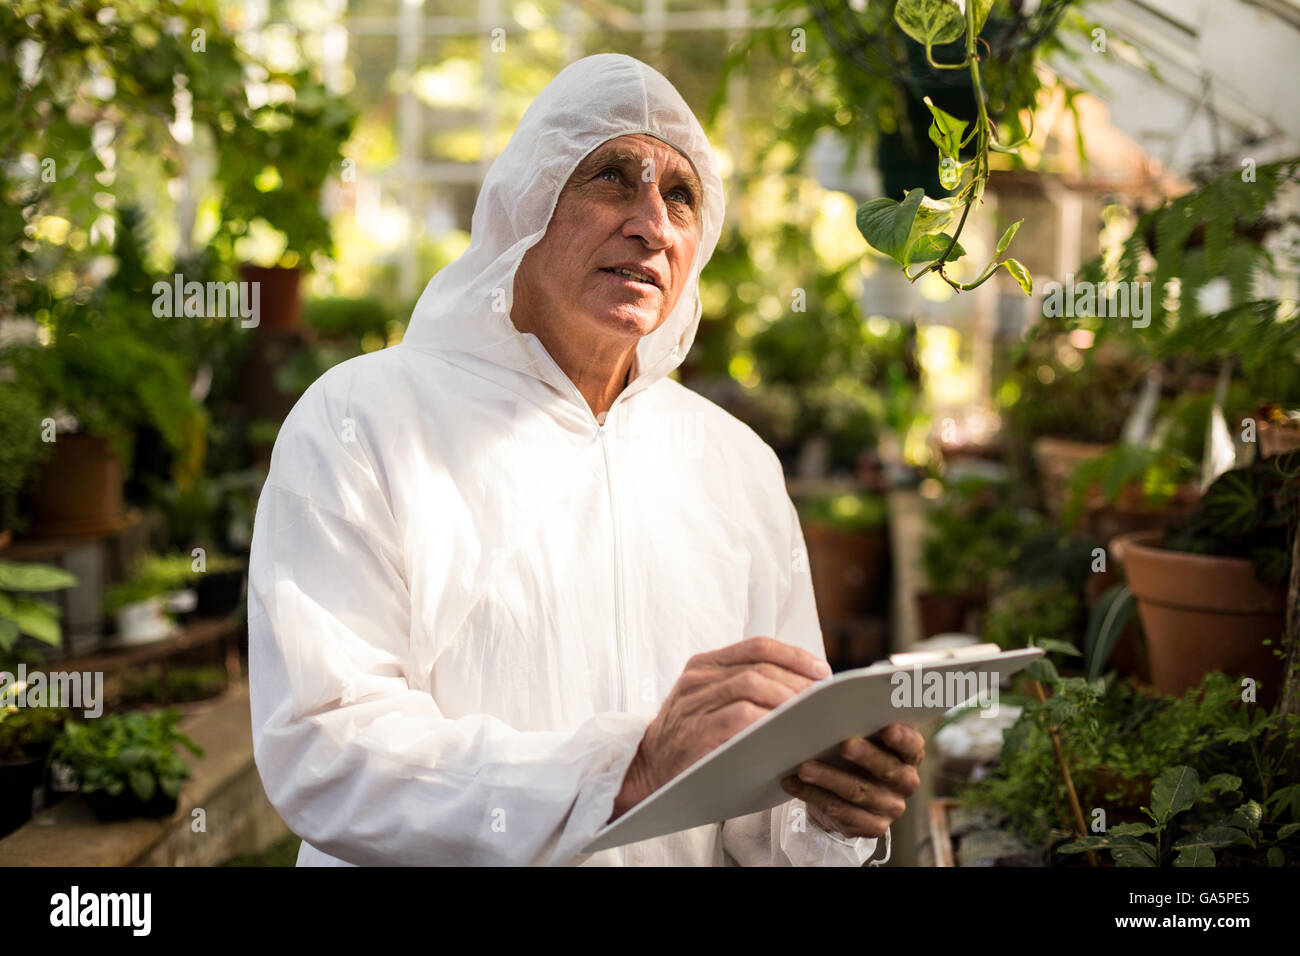 Male scientist inspecting in greenhouse Stock Photo